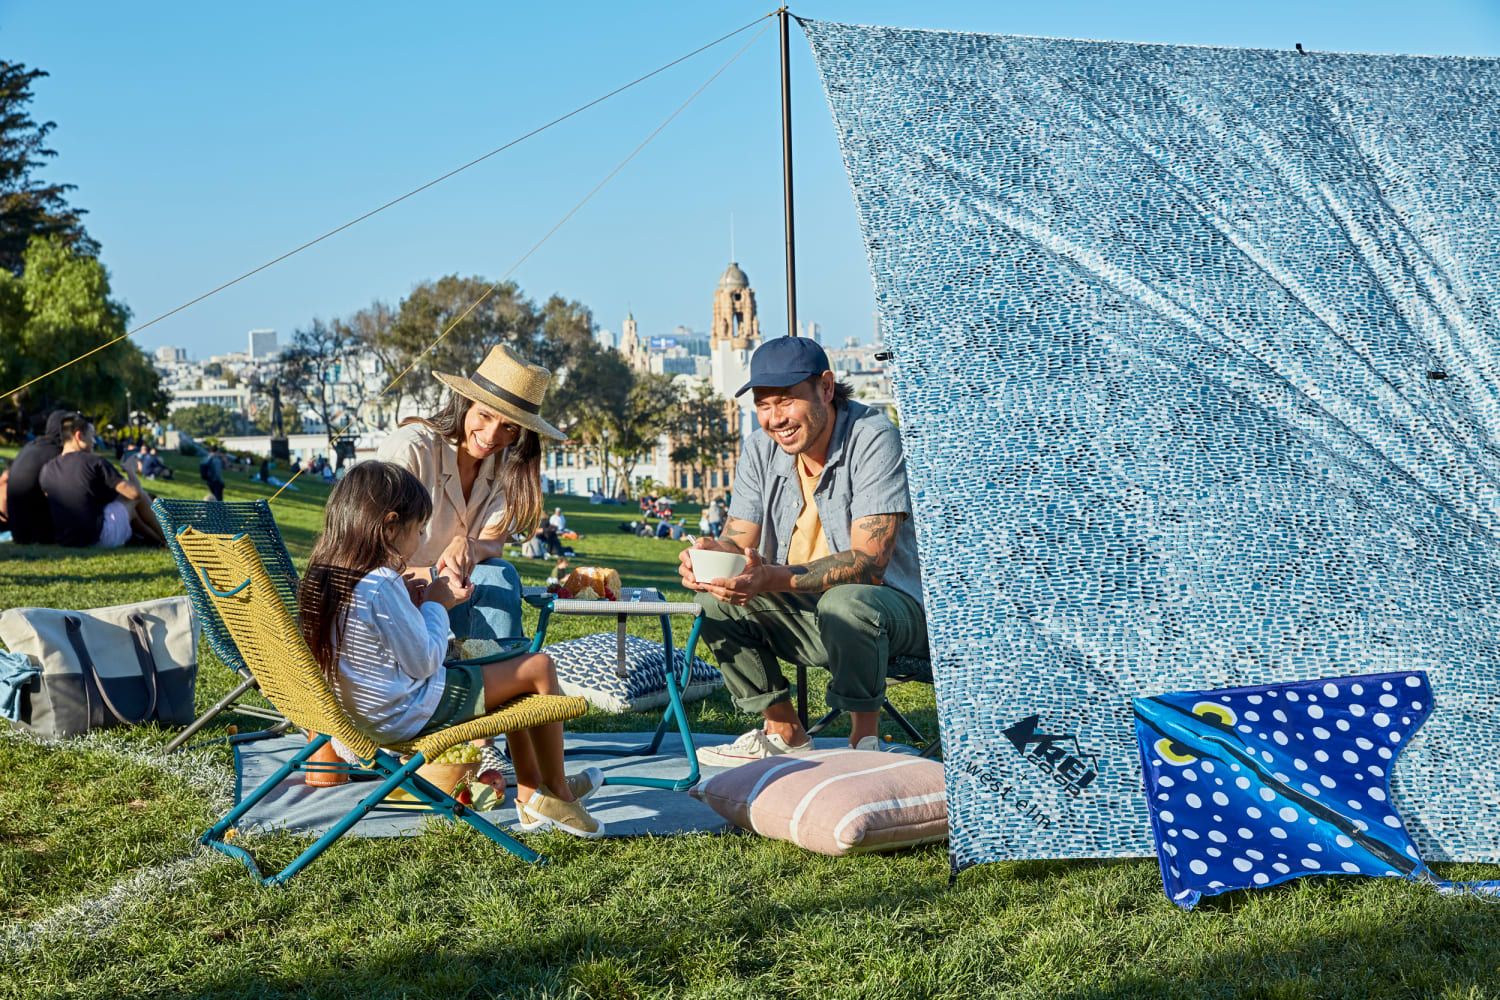 REI and West Elm team up to launch new outdoor collection